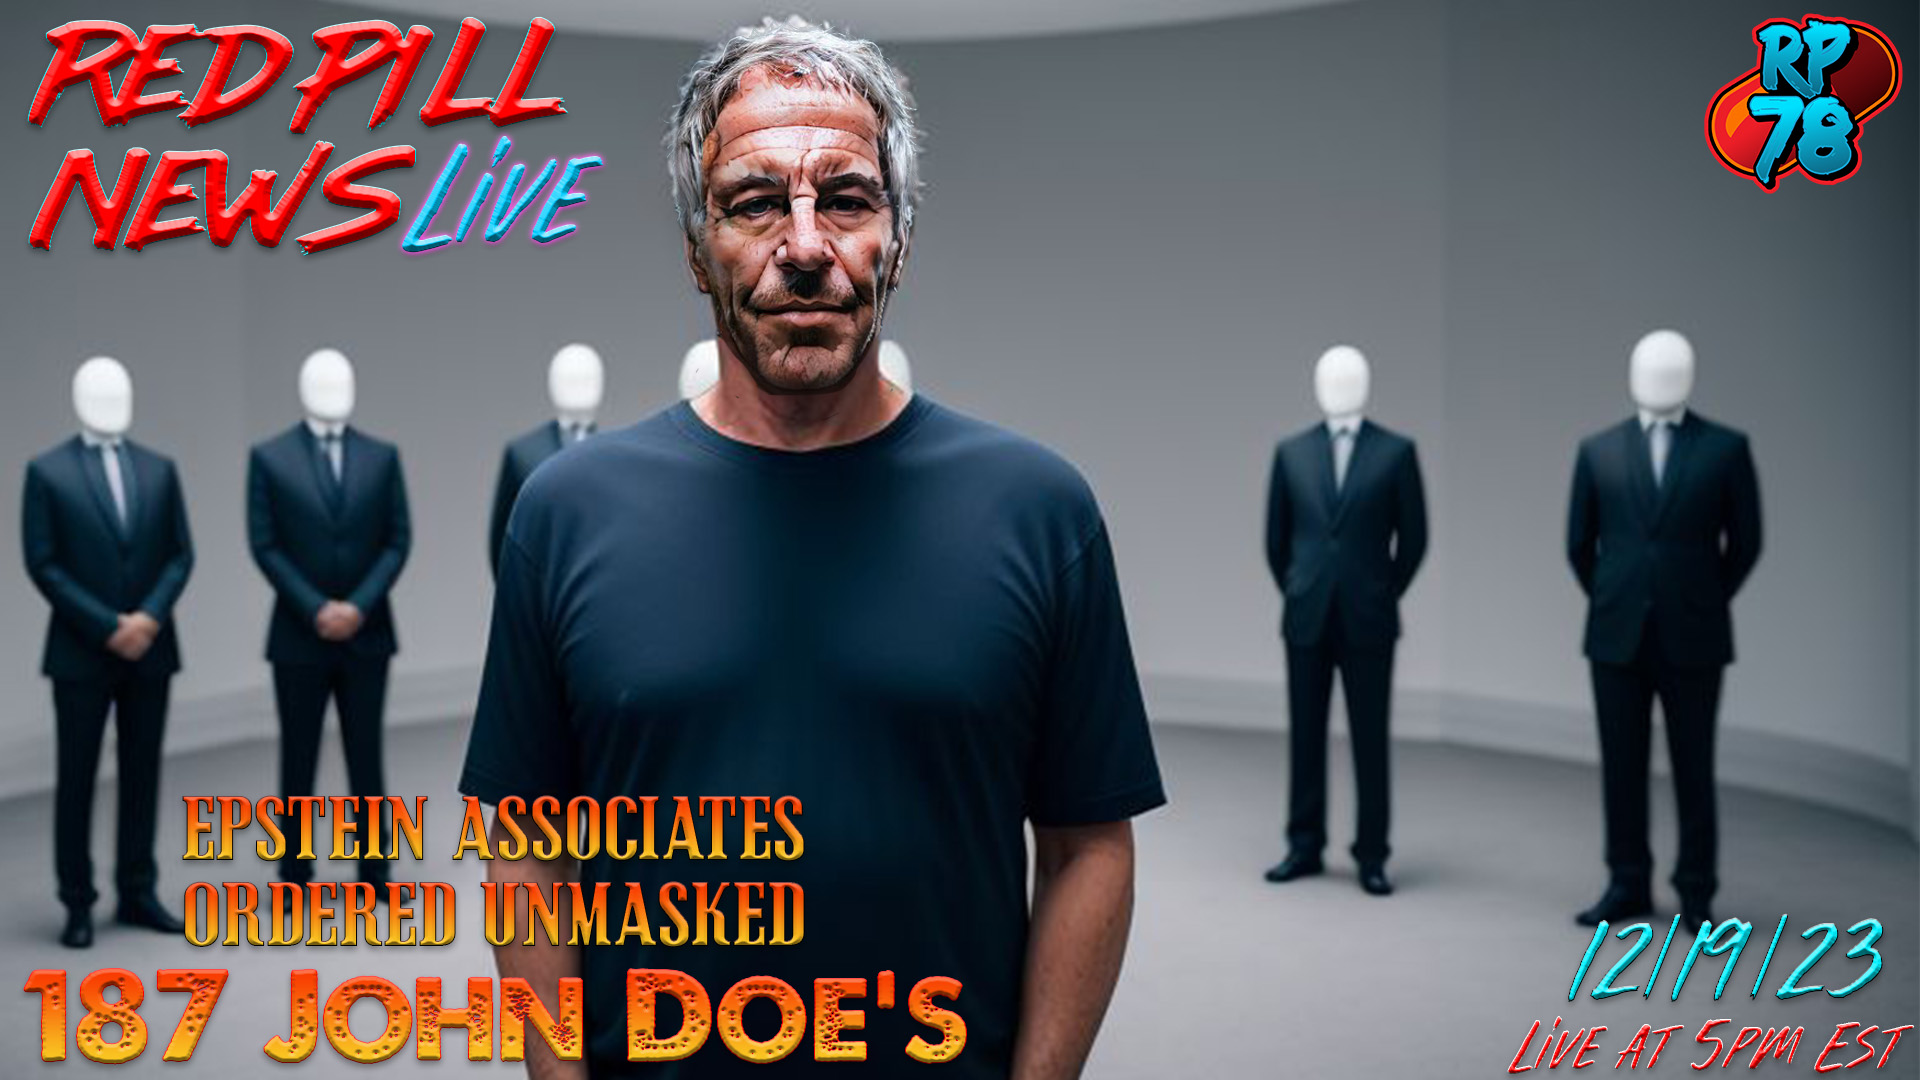 Who Made The List? Epstein Associates Unmasked on Red Pill News Live